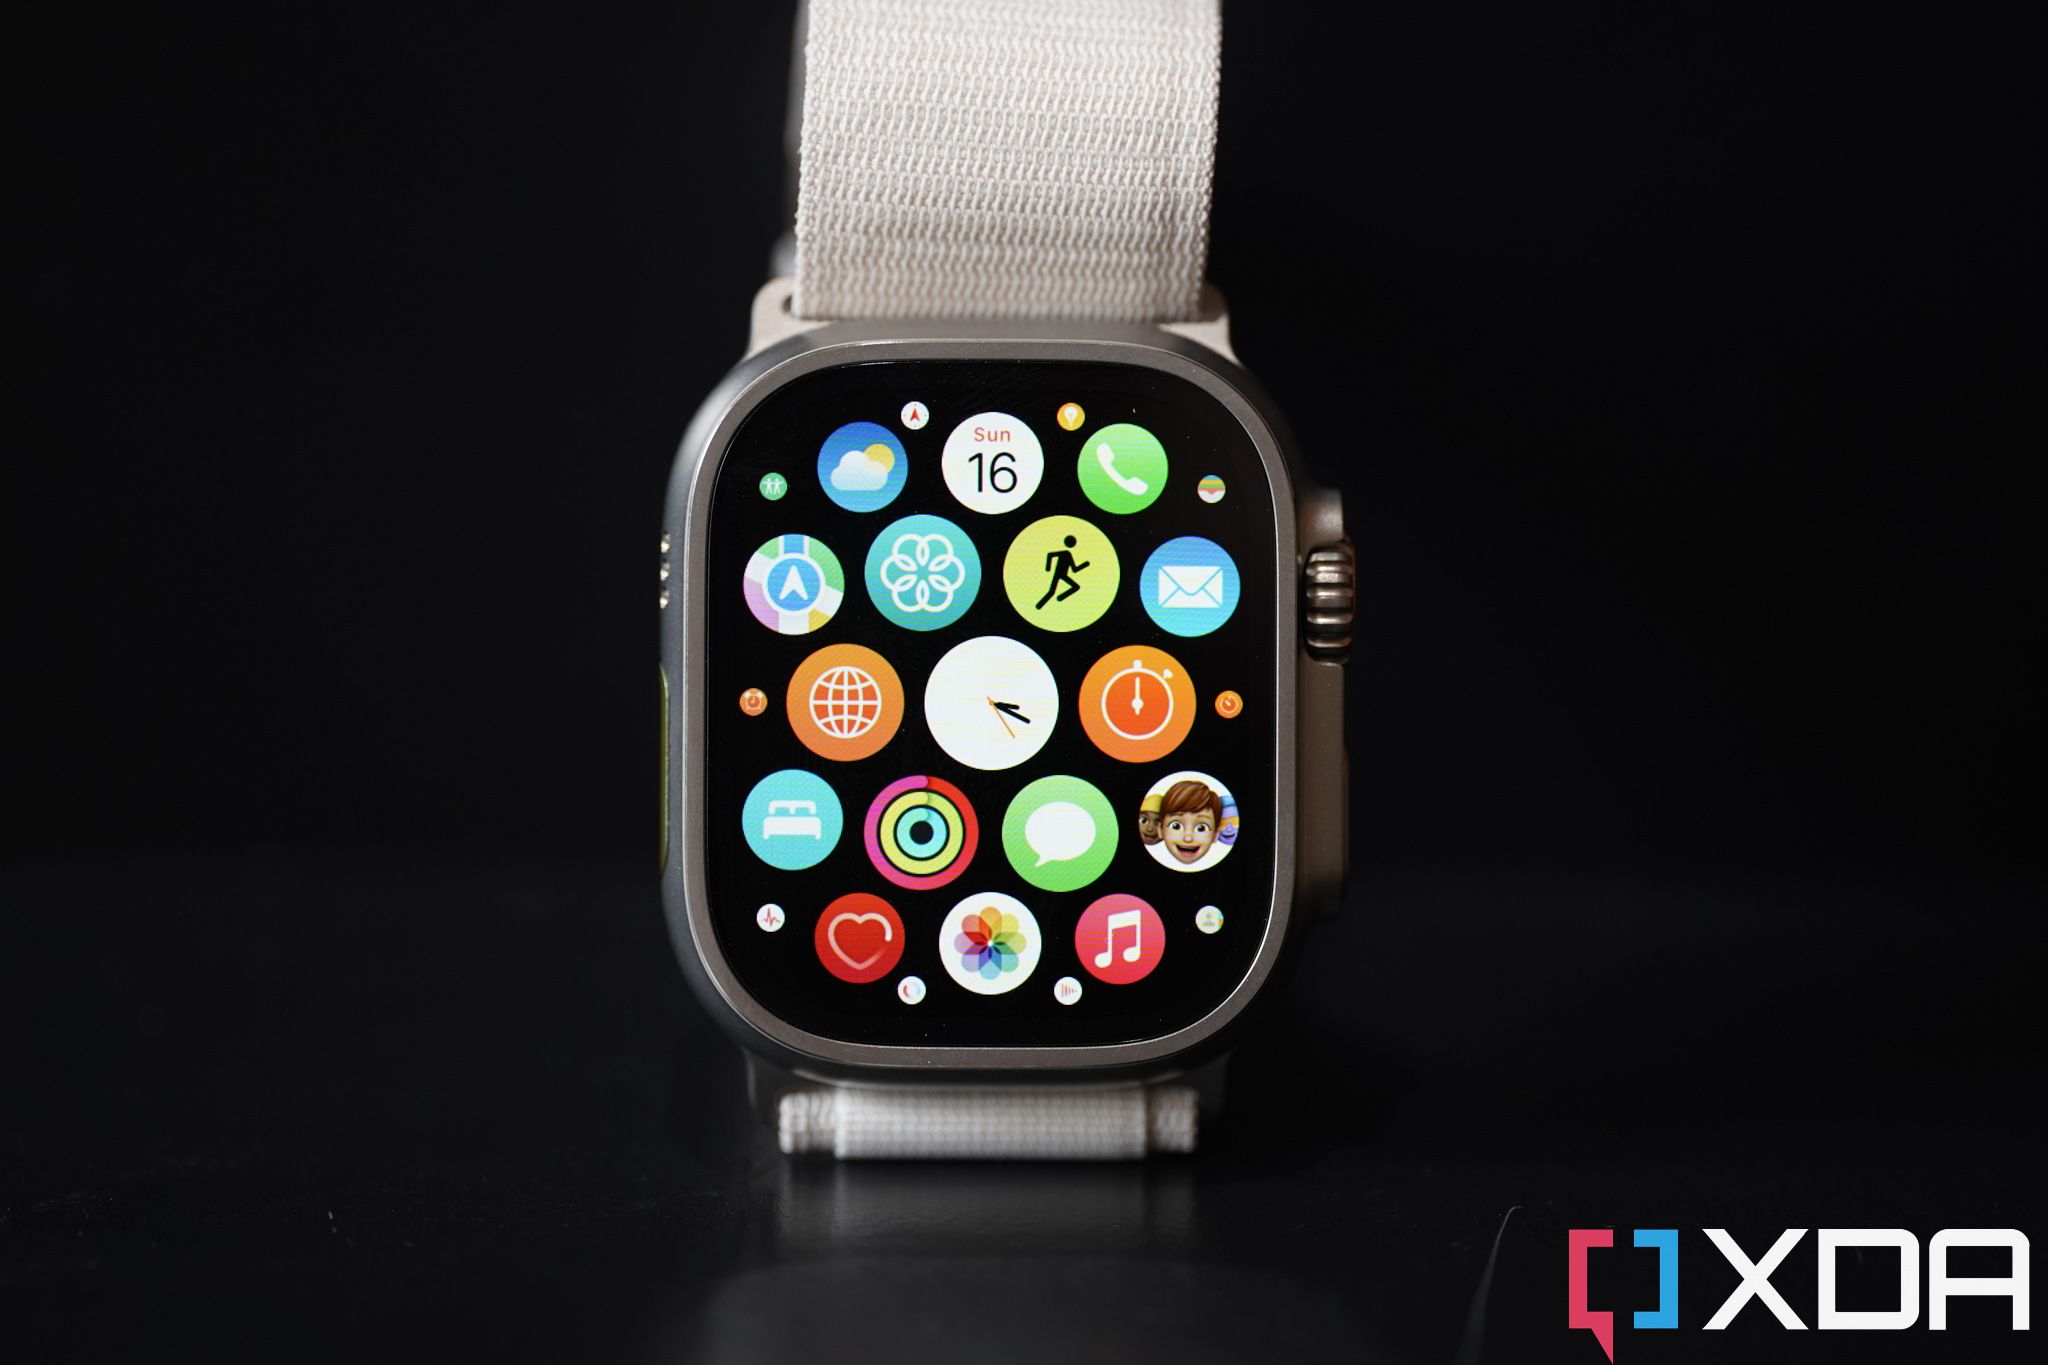 infrastructuur Voornaamwoord Dierentuin s nachts How to use the Walkie-Talkie feature on your Apple Watch